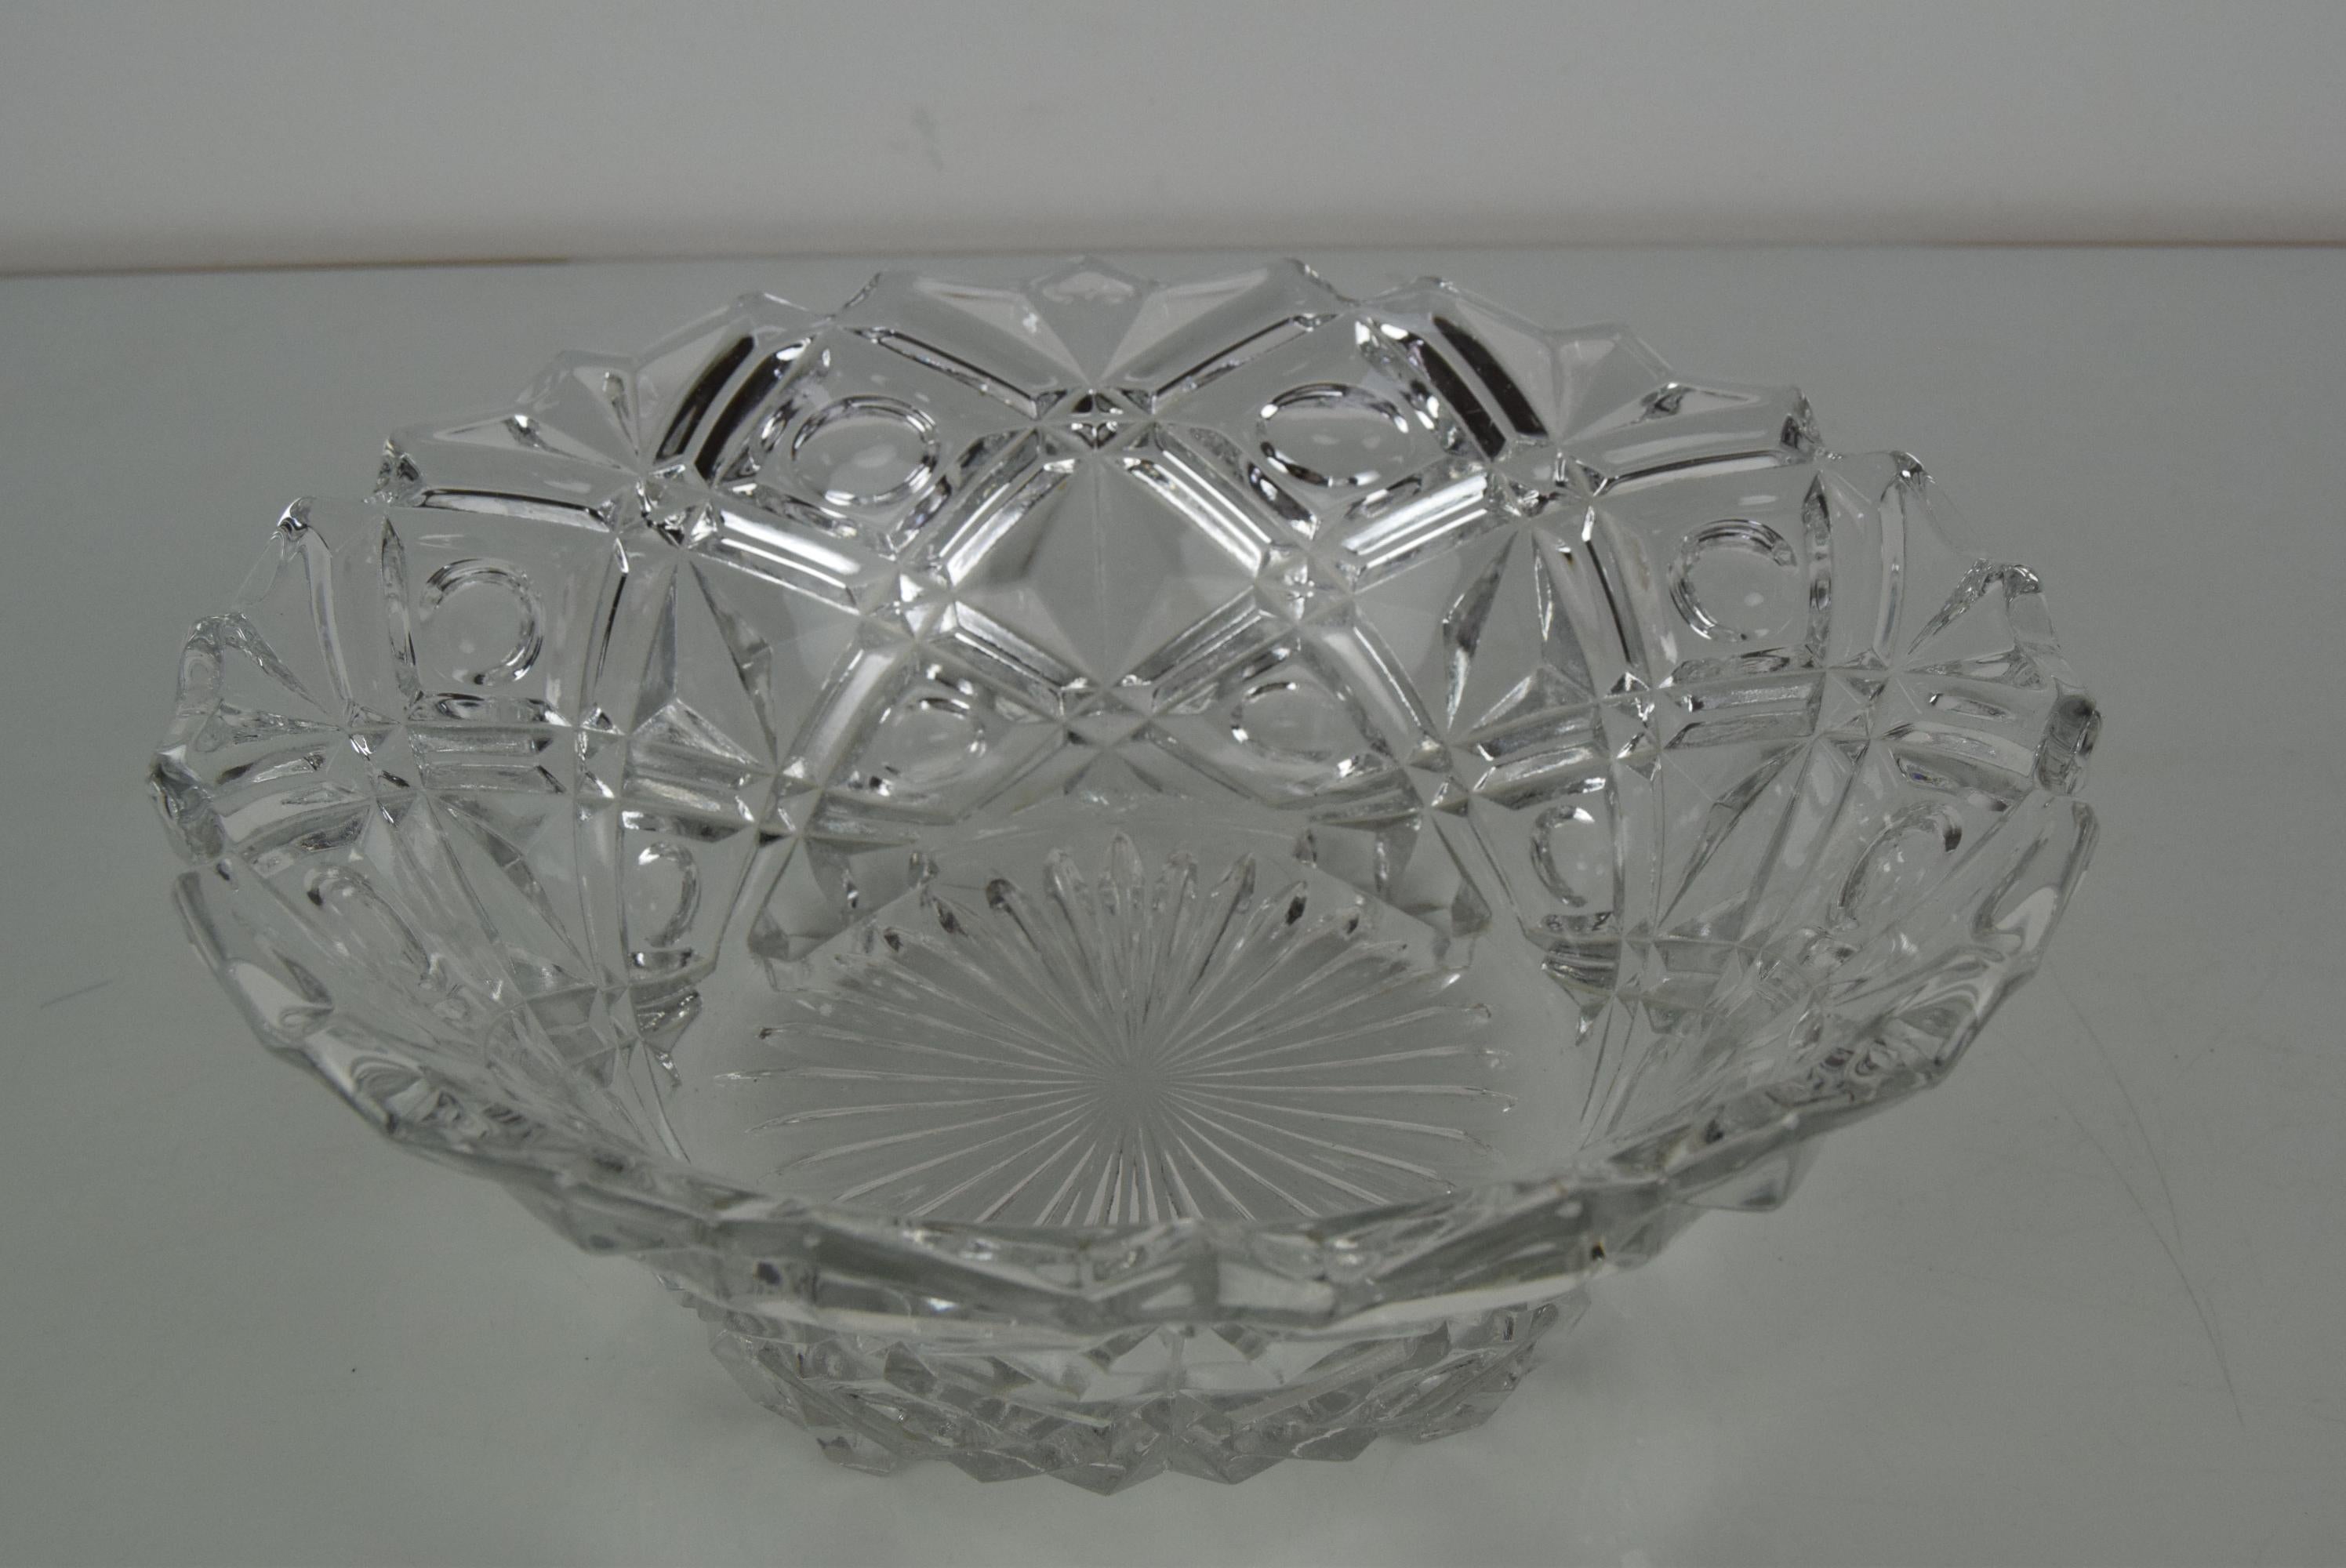 Czech Mid-Century Crystal Glass Bowl, 1960's For Sale